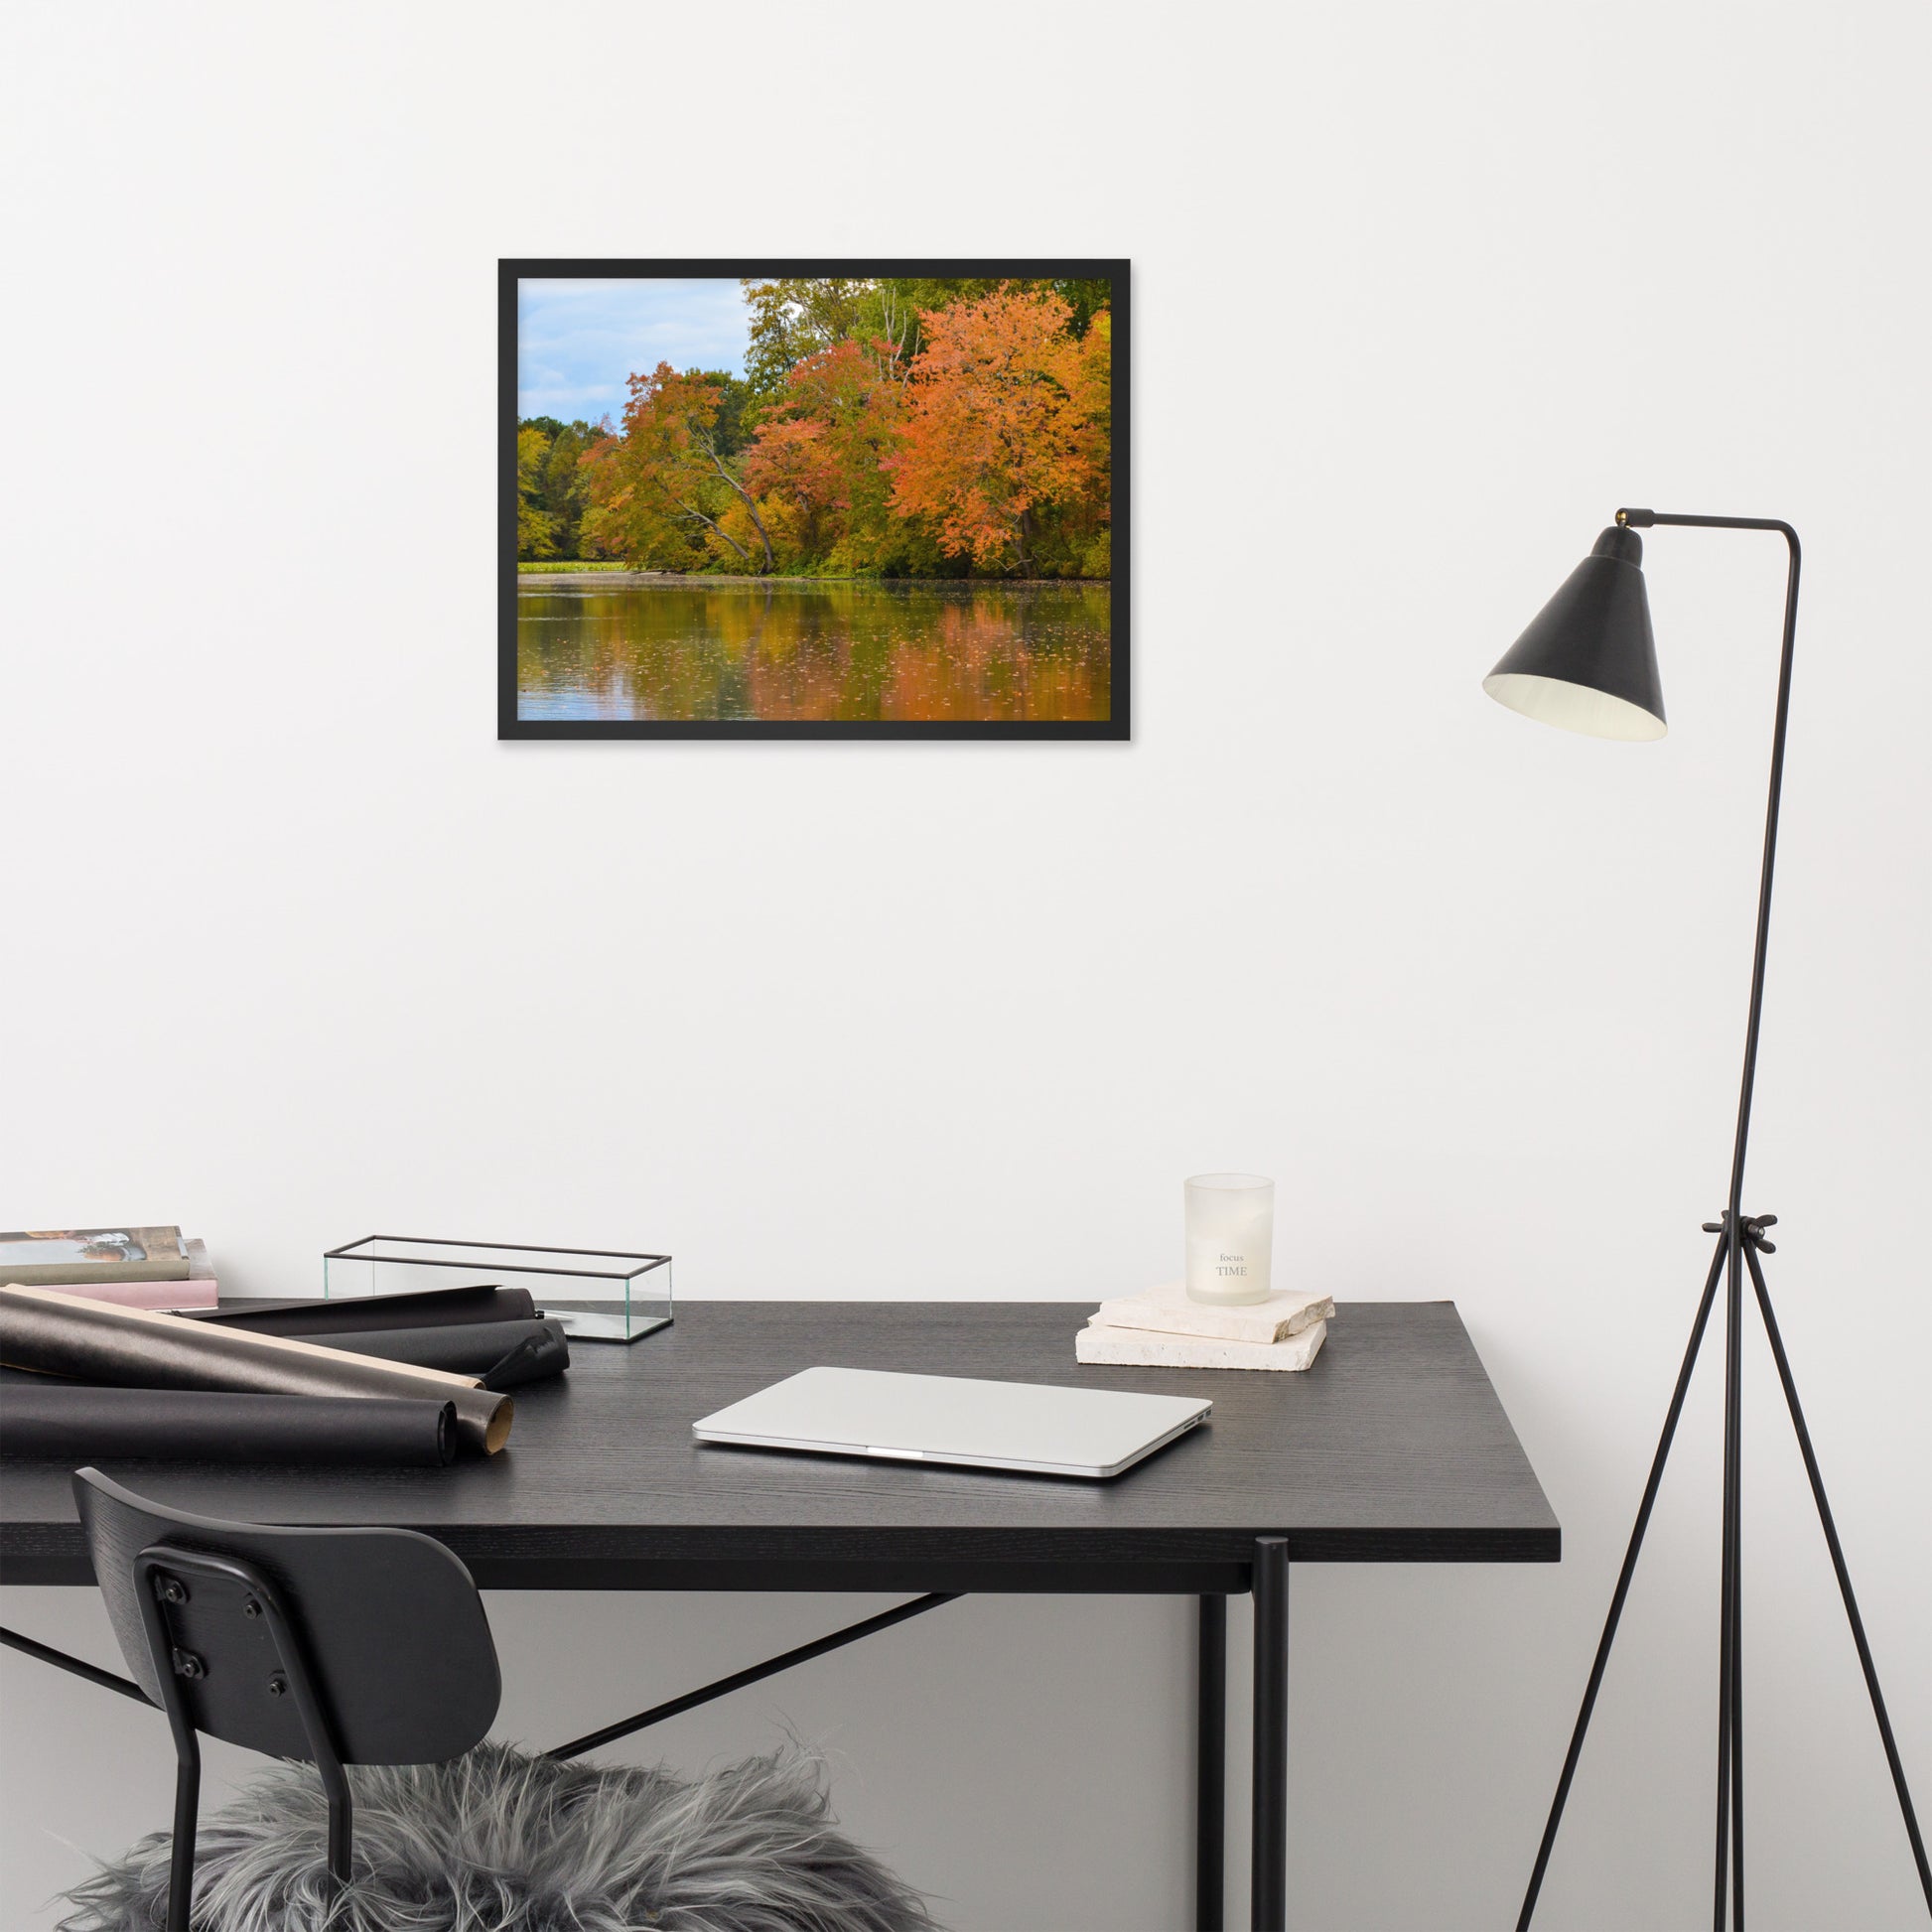 Wall Art Peaceful: Autumn Tree Line - Rural / Country Style Landscape / Nature Photograph  Framed Wall Art Print - Wall Decor - Artwork